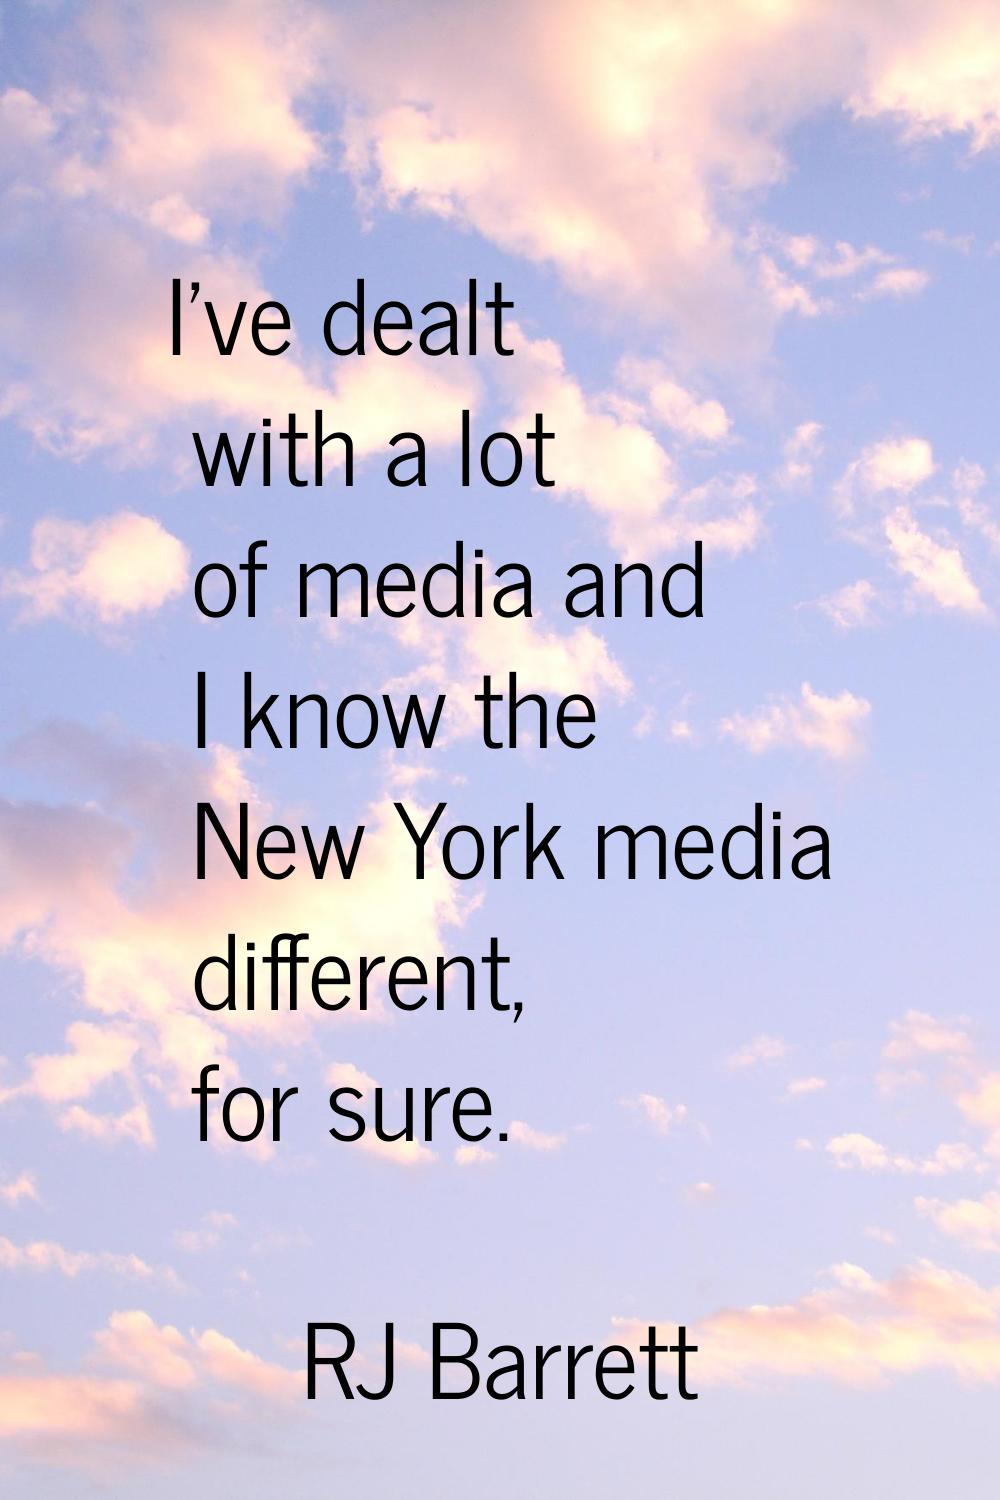 I've dealt with a lot of media and I know the New York media different, for sure.